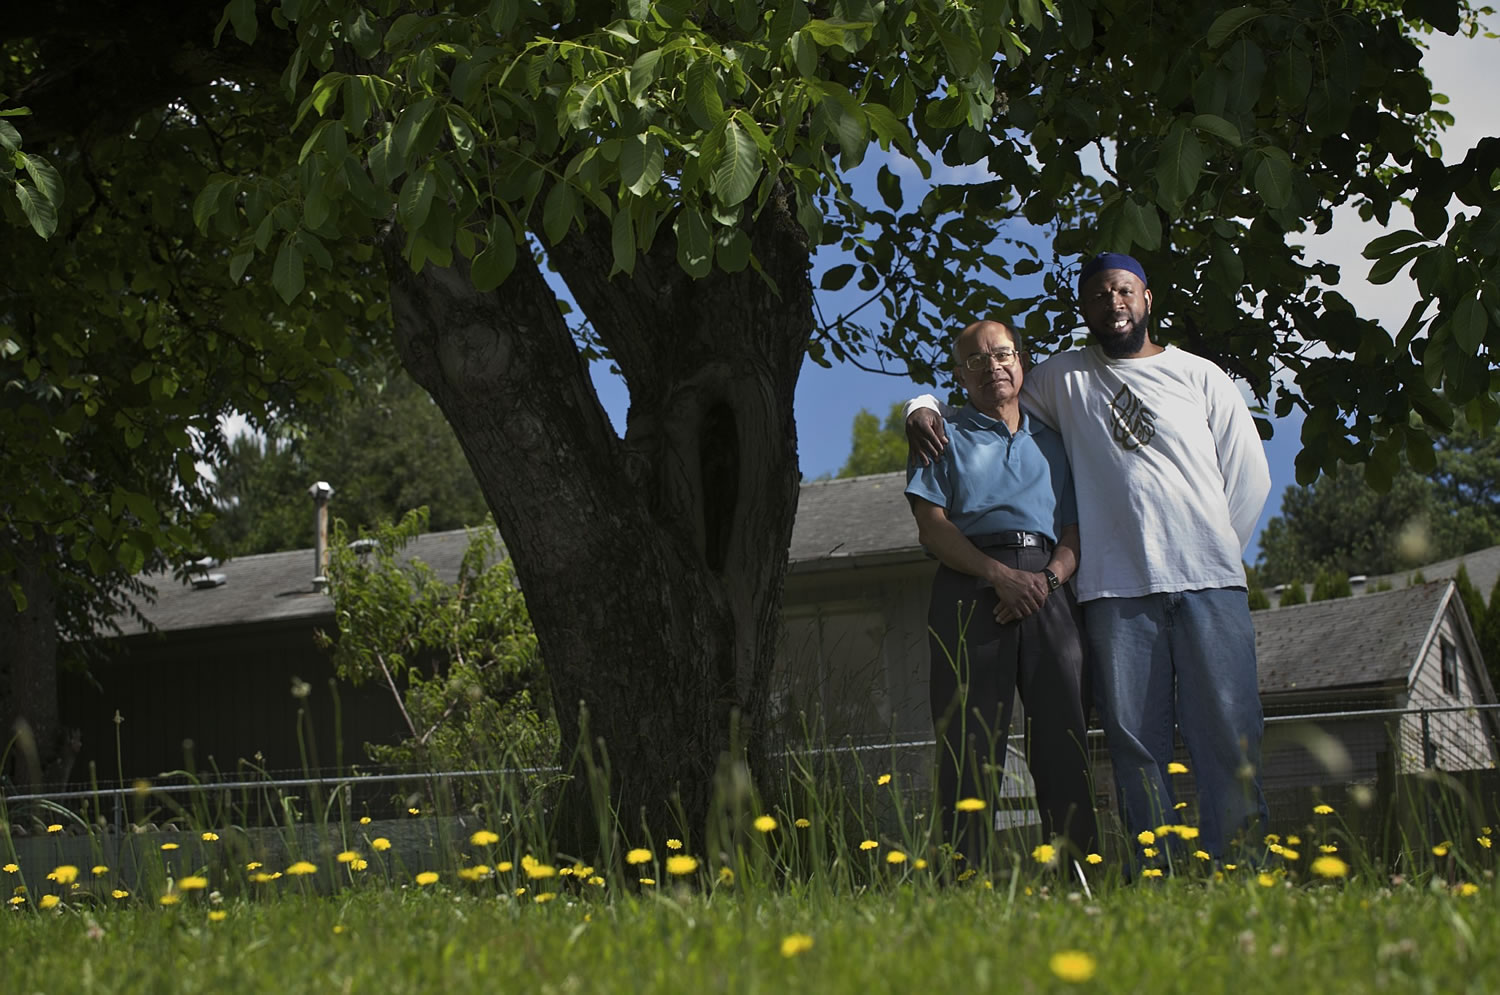 Khalid Khan, left, a native of India, and Tervaris Evans, who hails from Georgia, are two of the board members of the Islamic Society of Southwest Washington. Clark County Muslims come from all over the world, Khan said, representing many language and cultures.